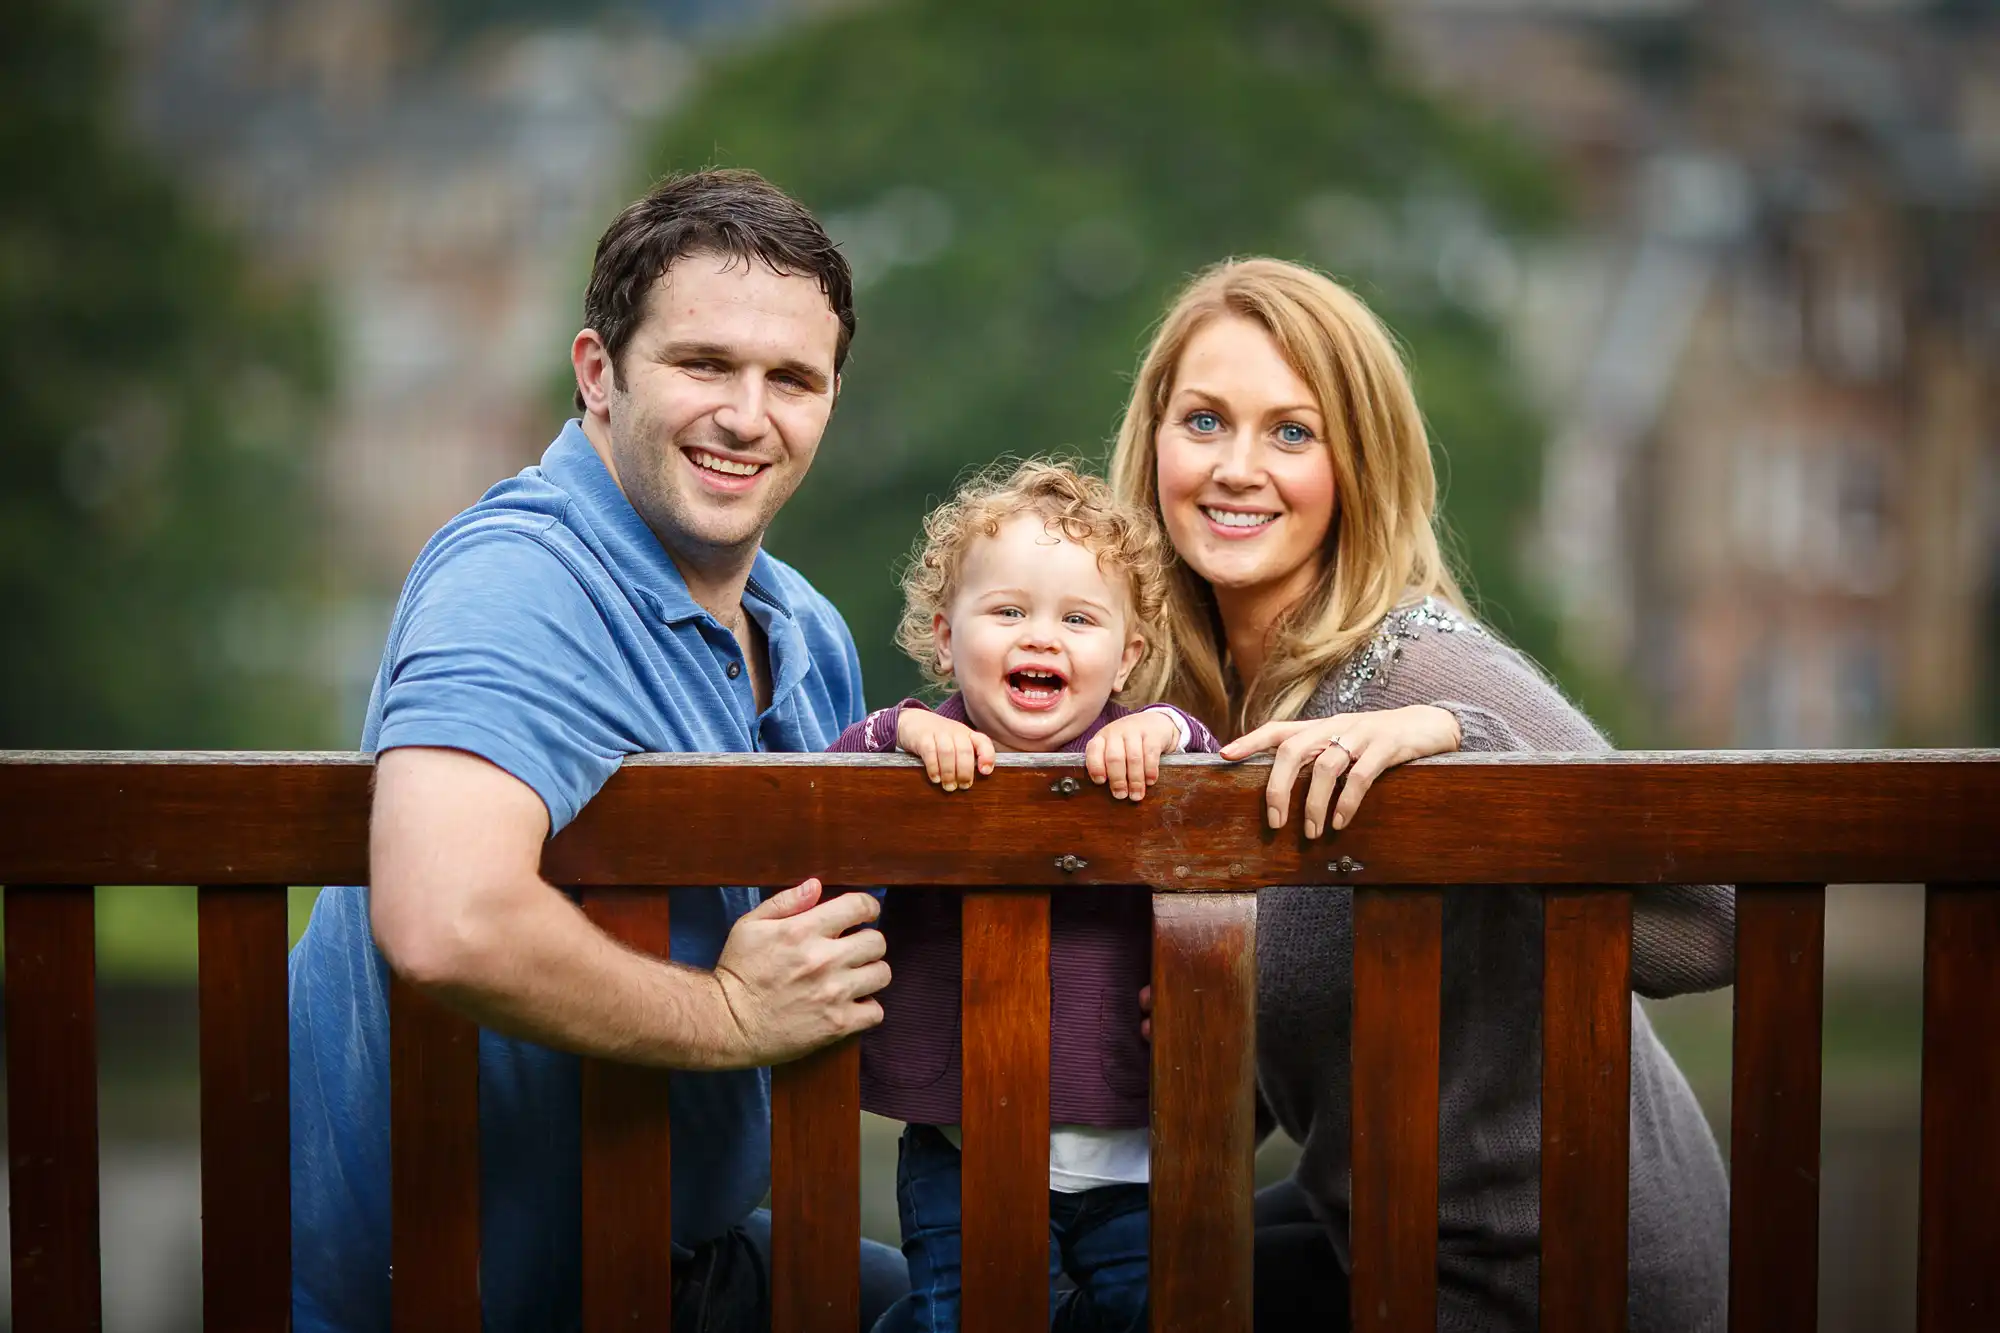 A happy family with a child standing behind a wooden railing, smiling outdoors with a blurred background of trees and buildings.